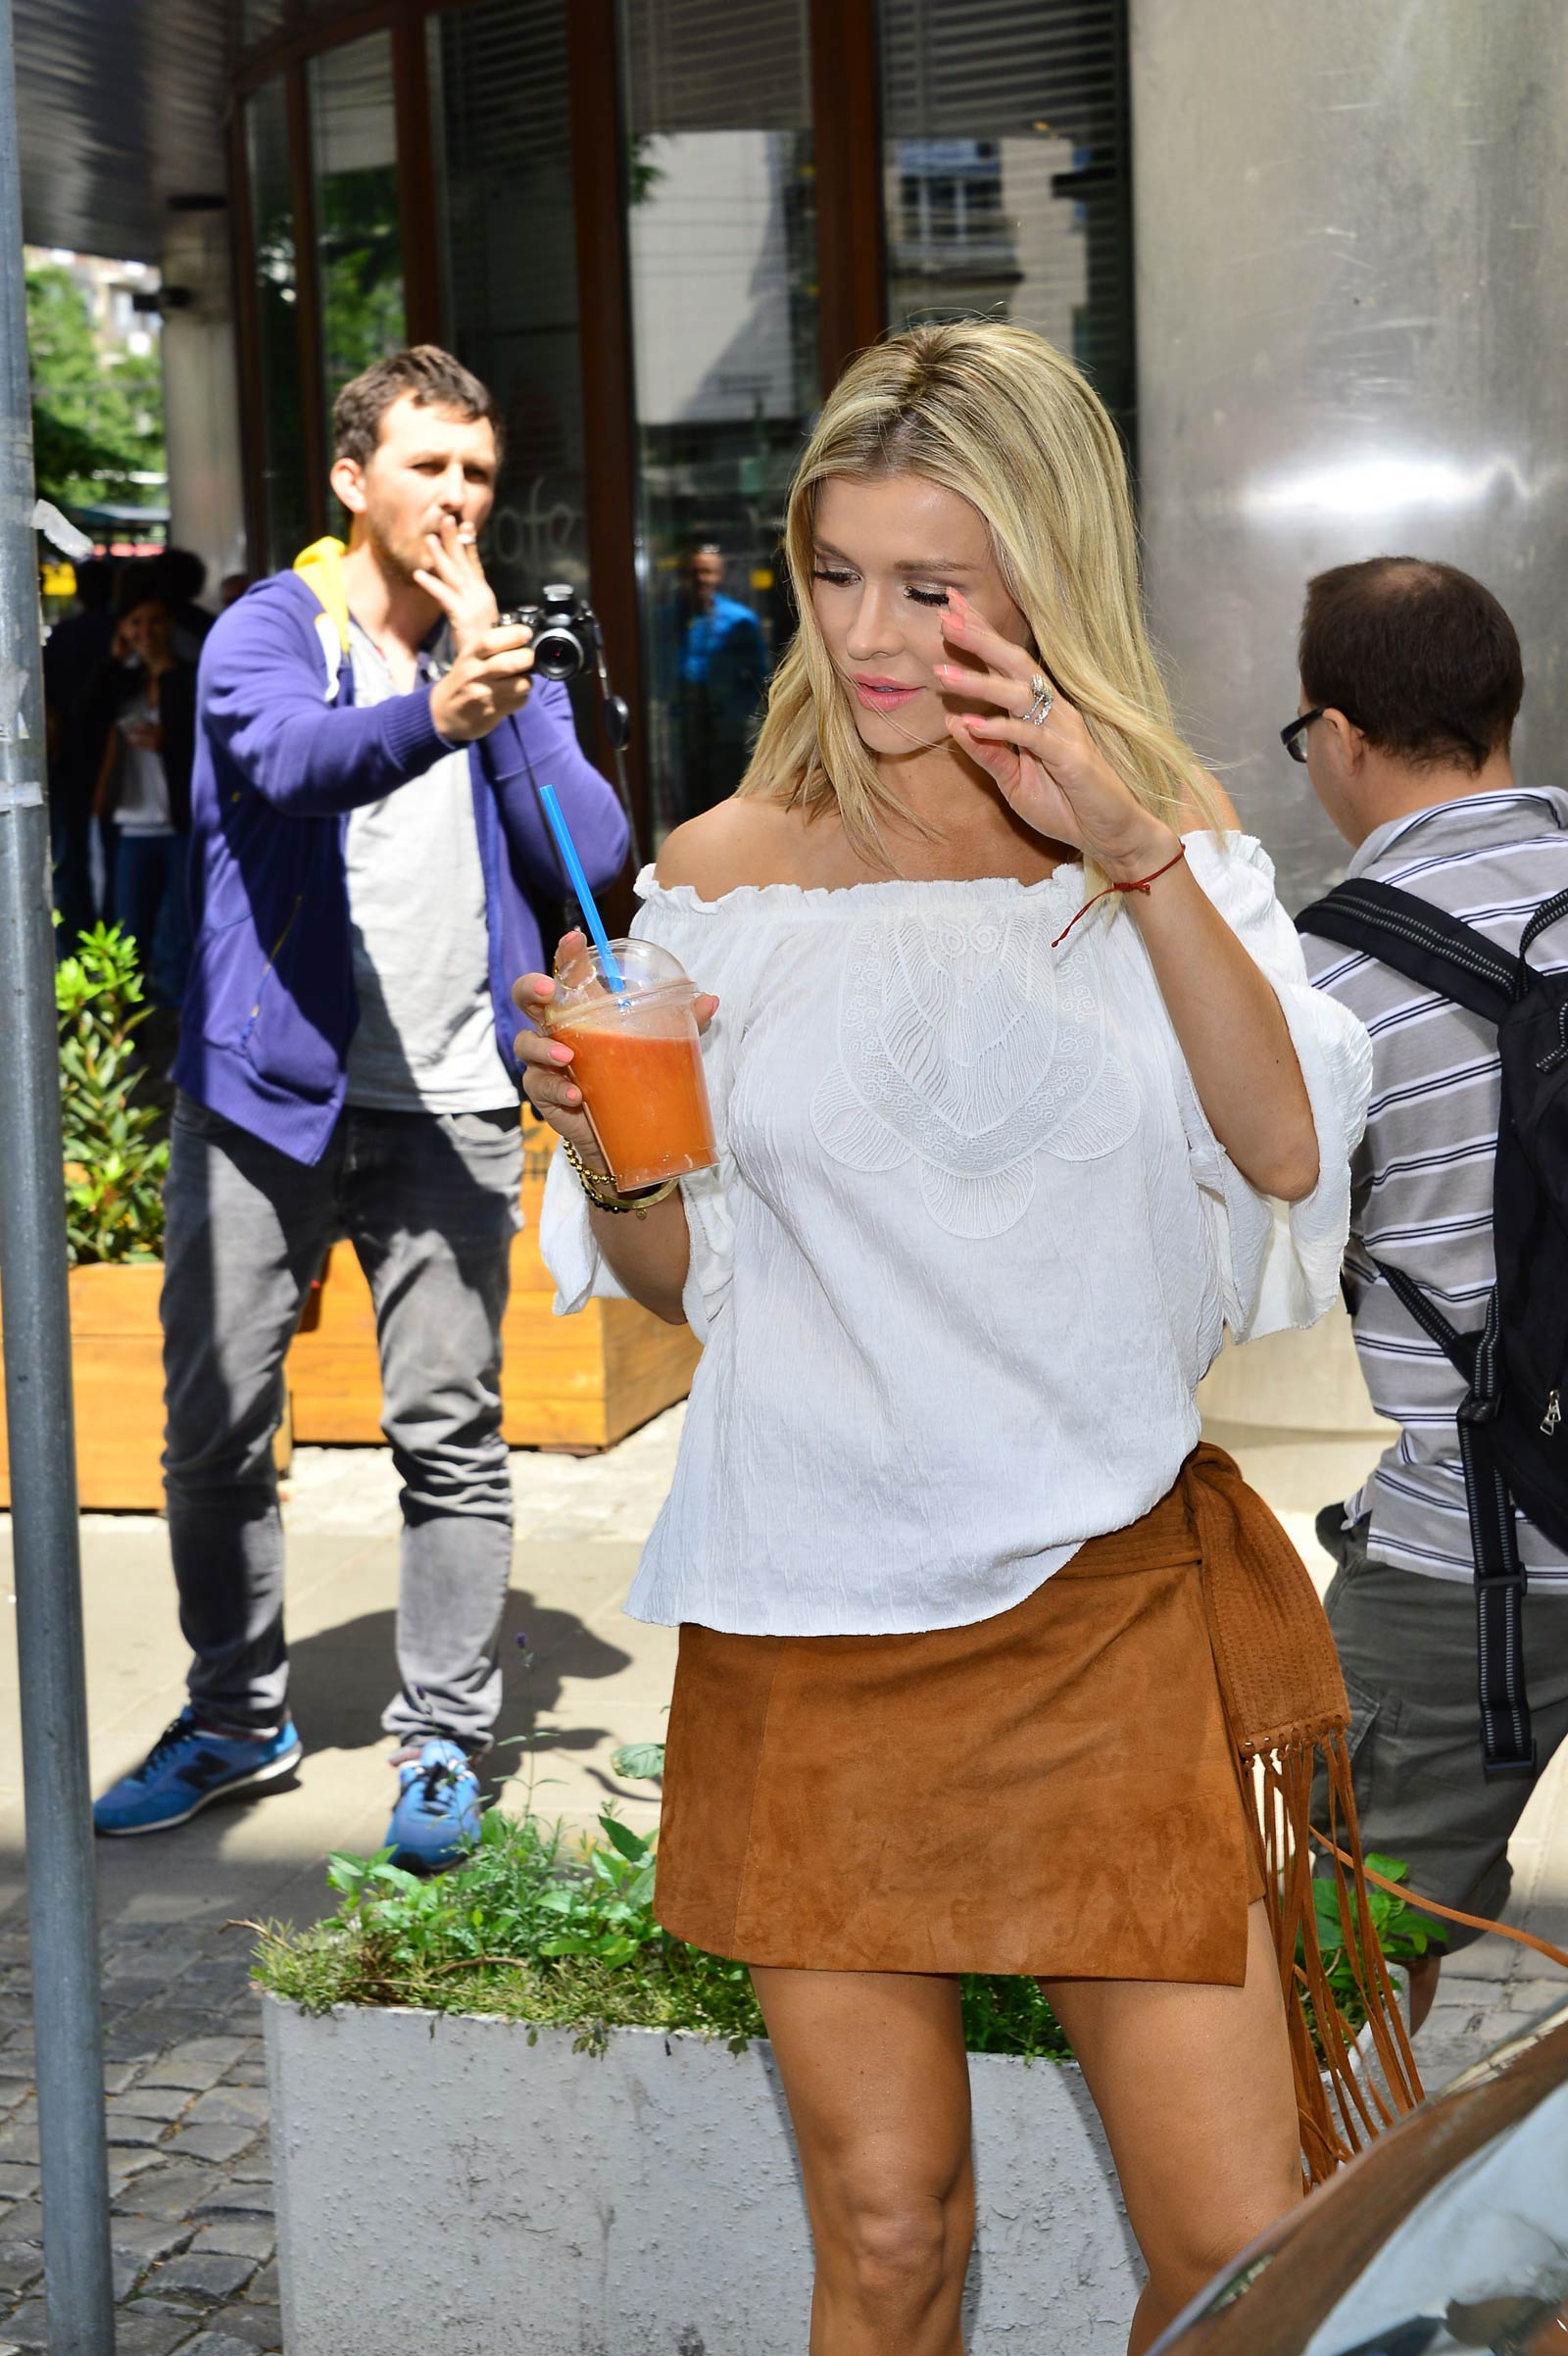 Joanna Krupa leaving her apartment on her way to TVN Television